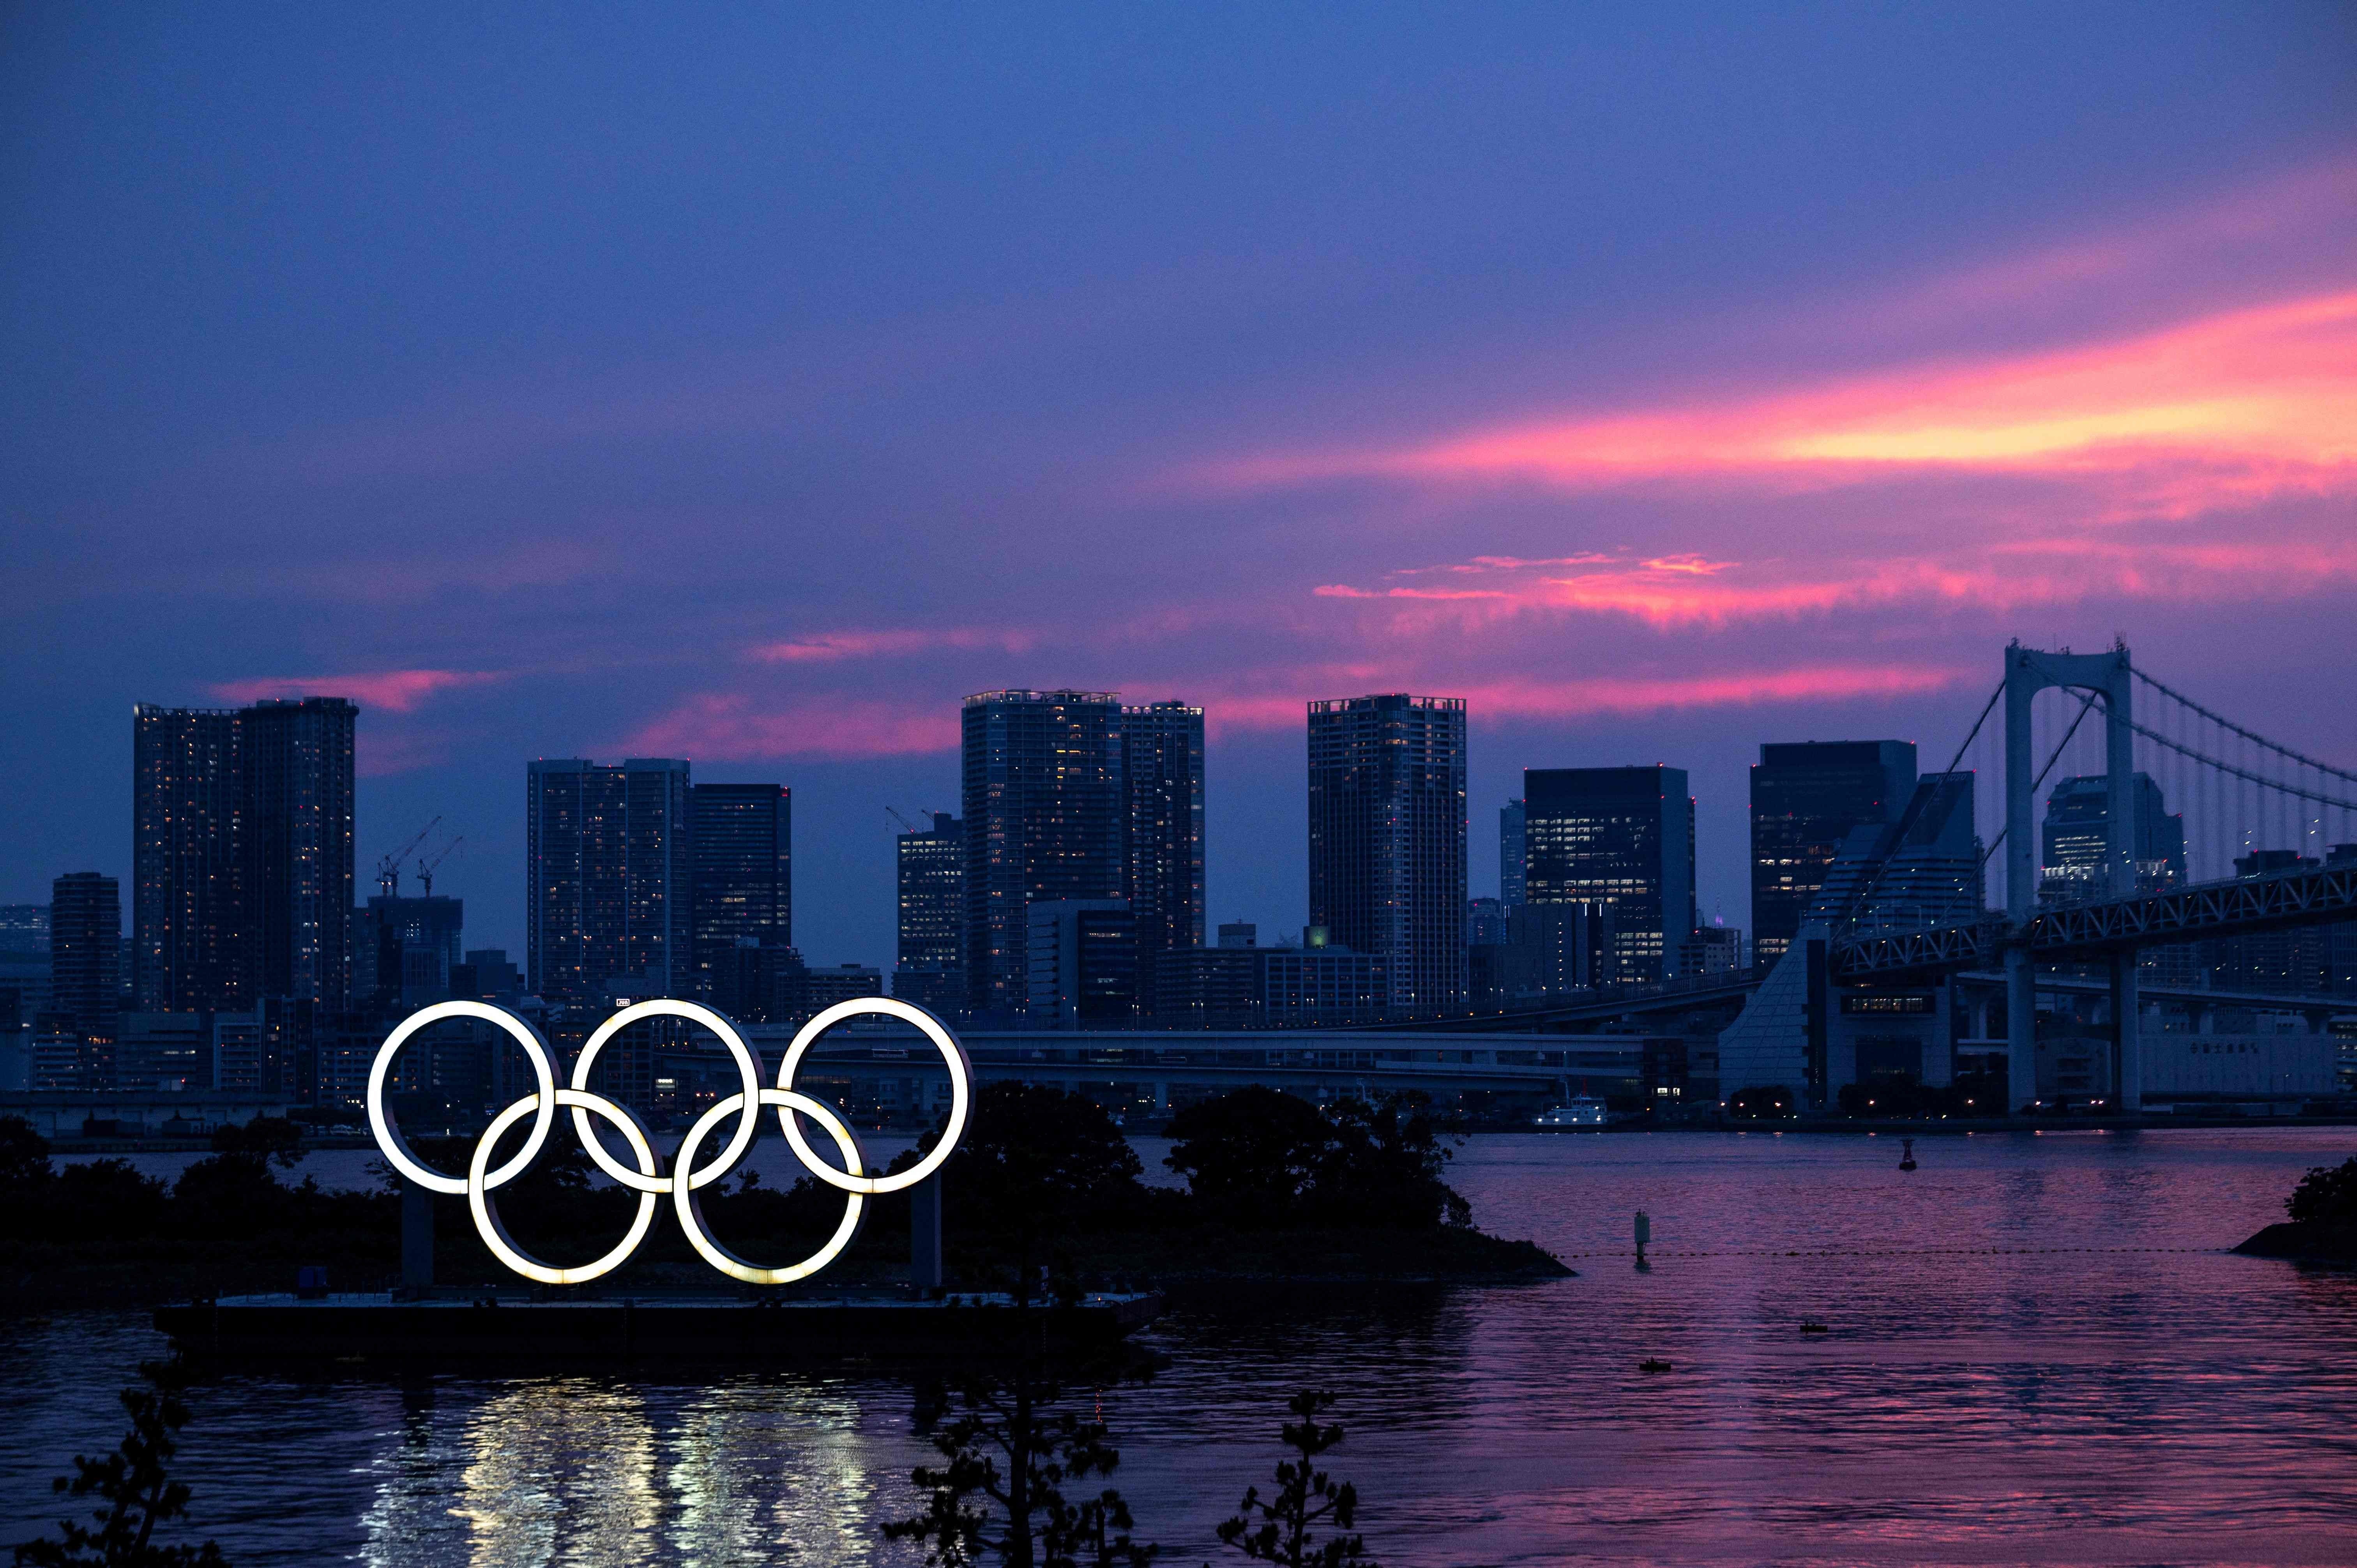 A general view shows the Olympic rings lit up at dusk, with the Rainbow bridge in the background, on the Odaiba waterfront in Tokyo